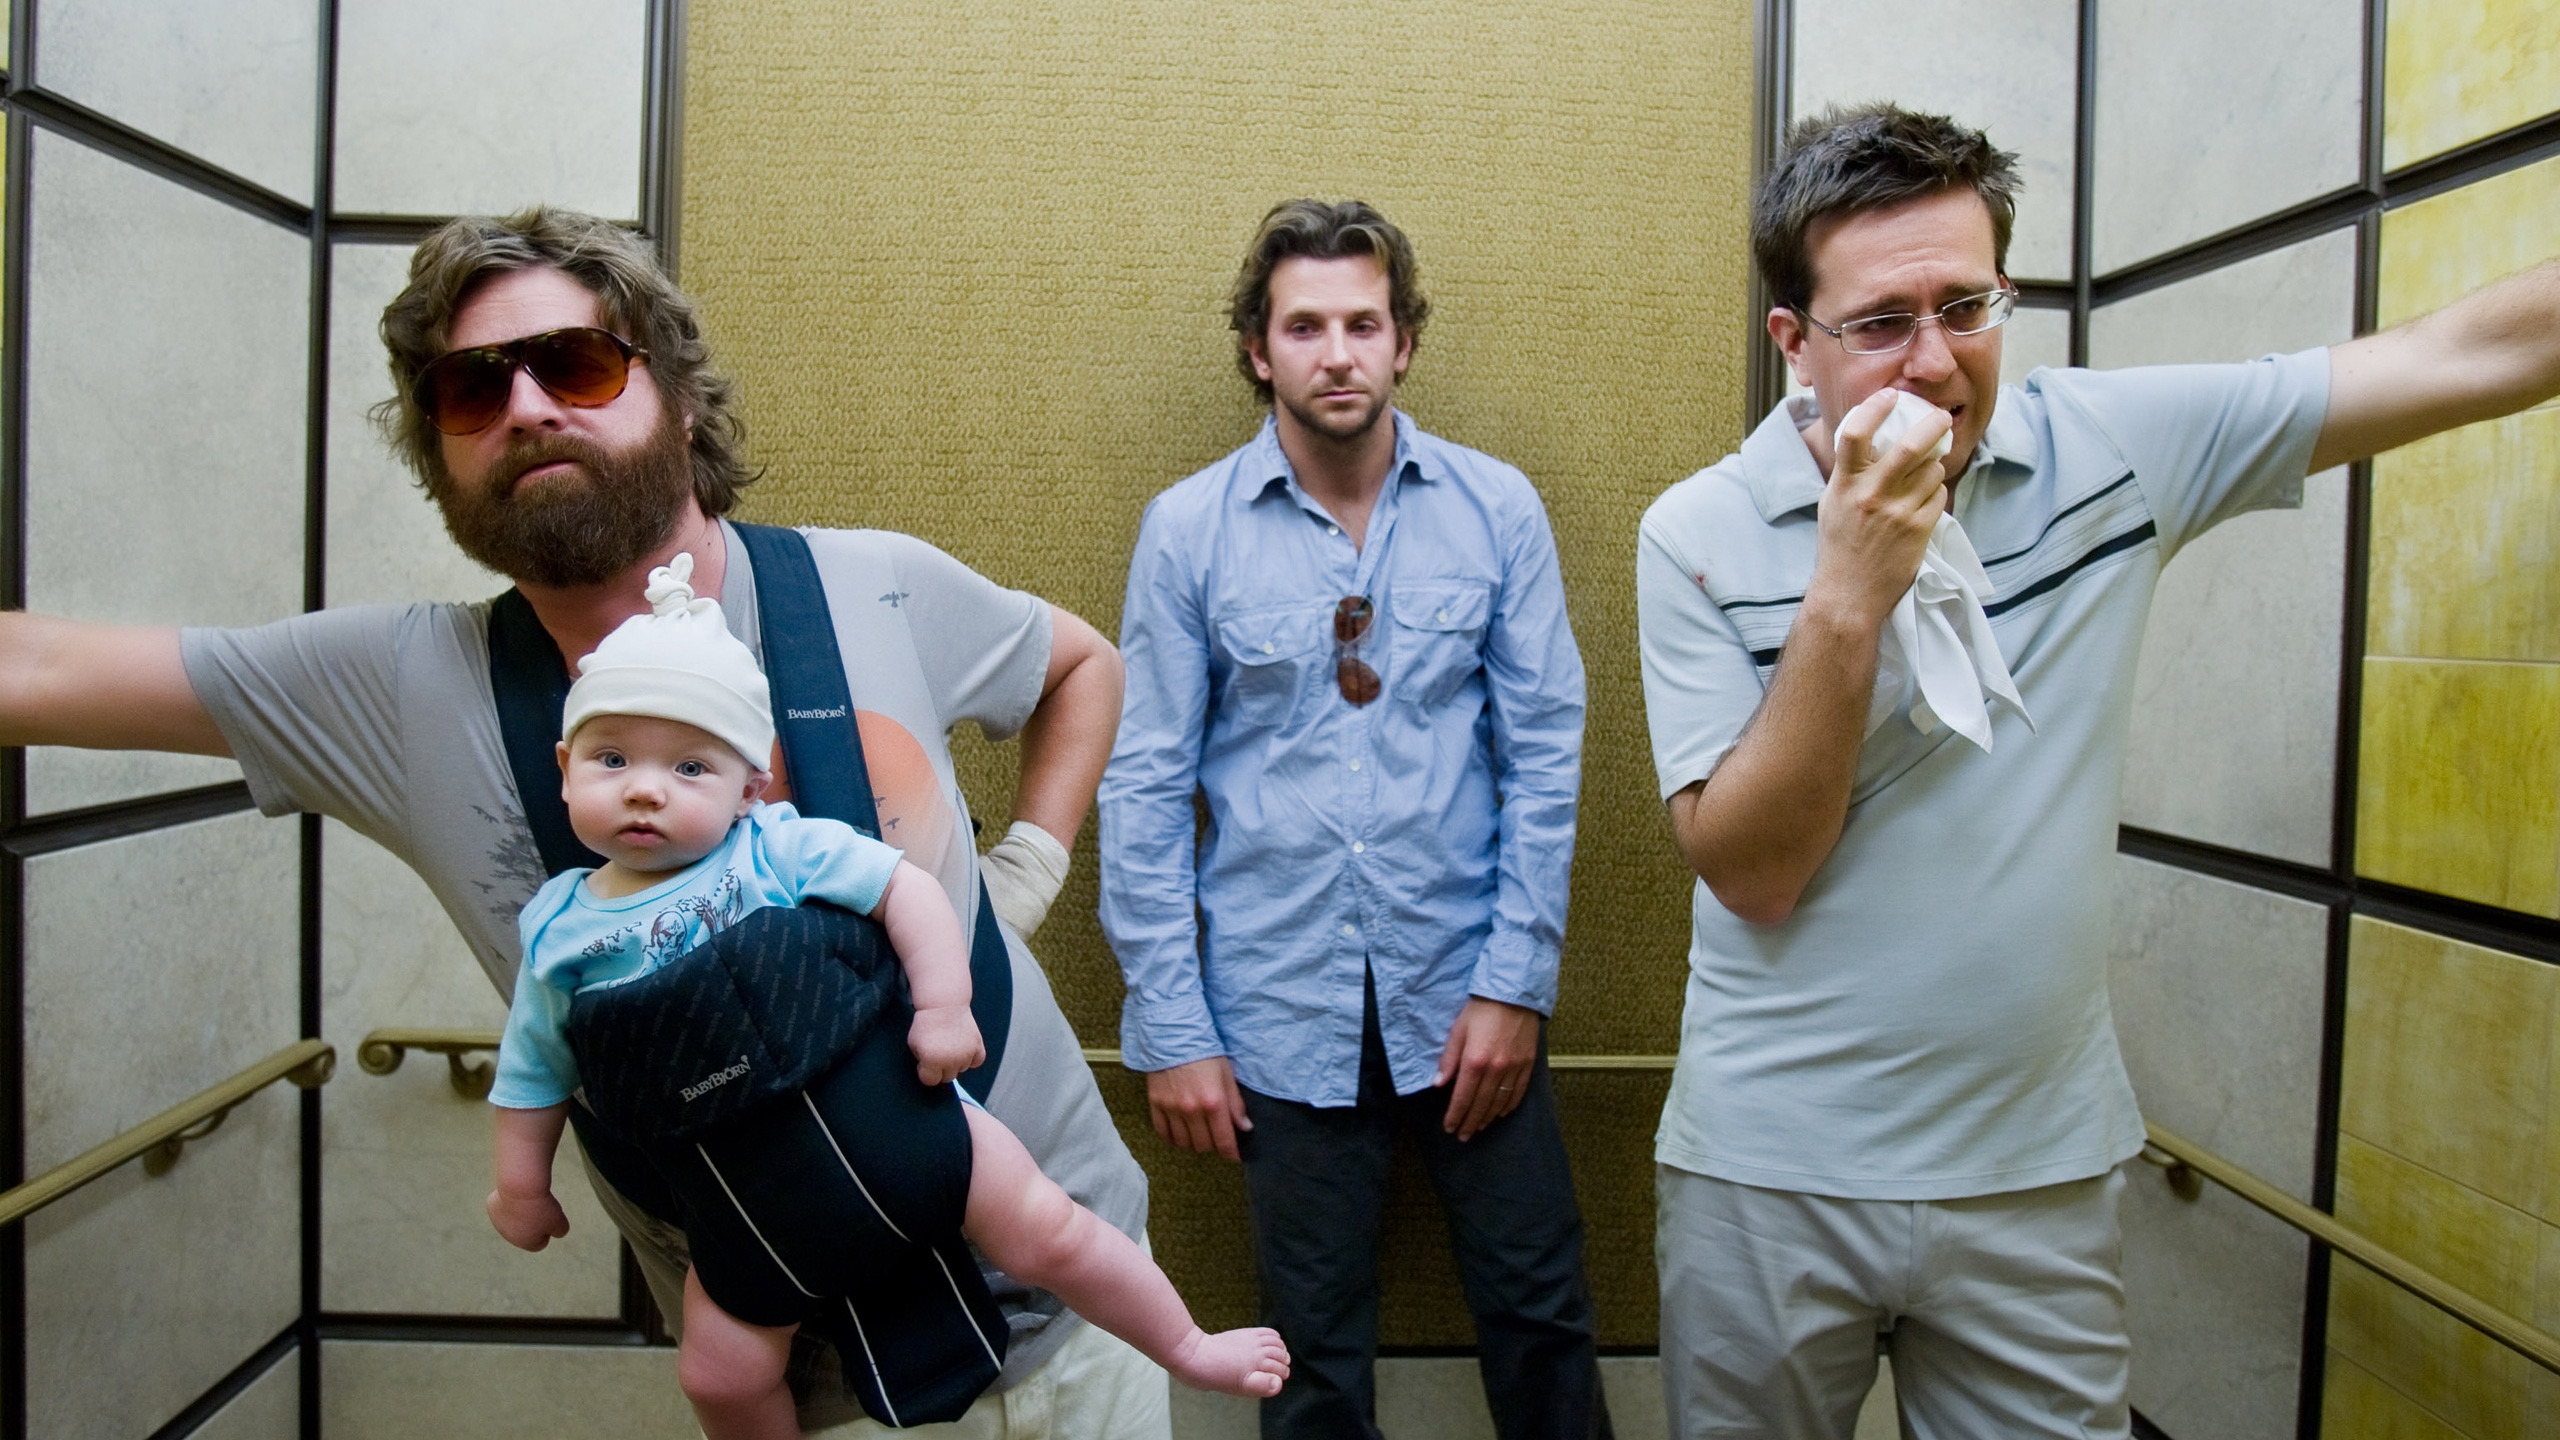 The Hangover for 2560x1440 HDTV resolution